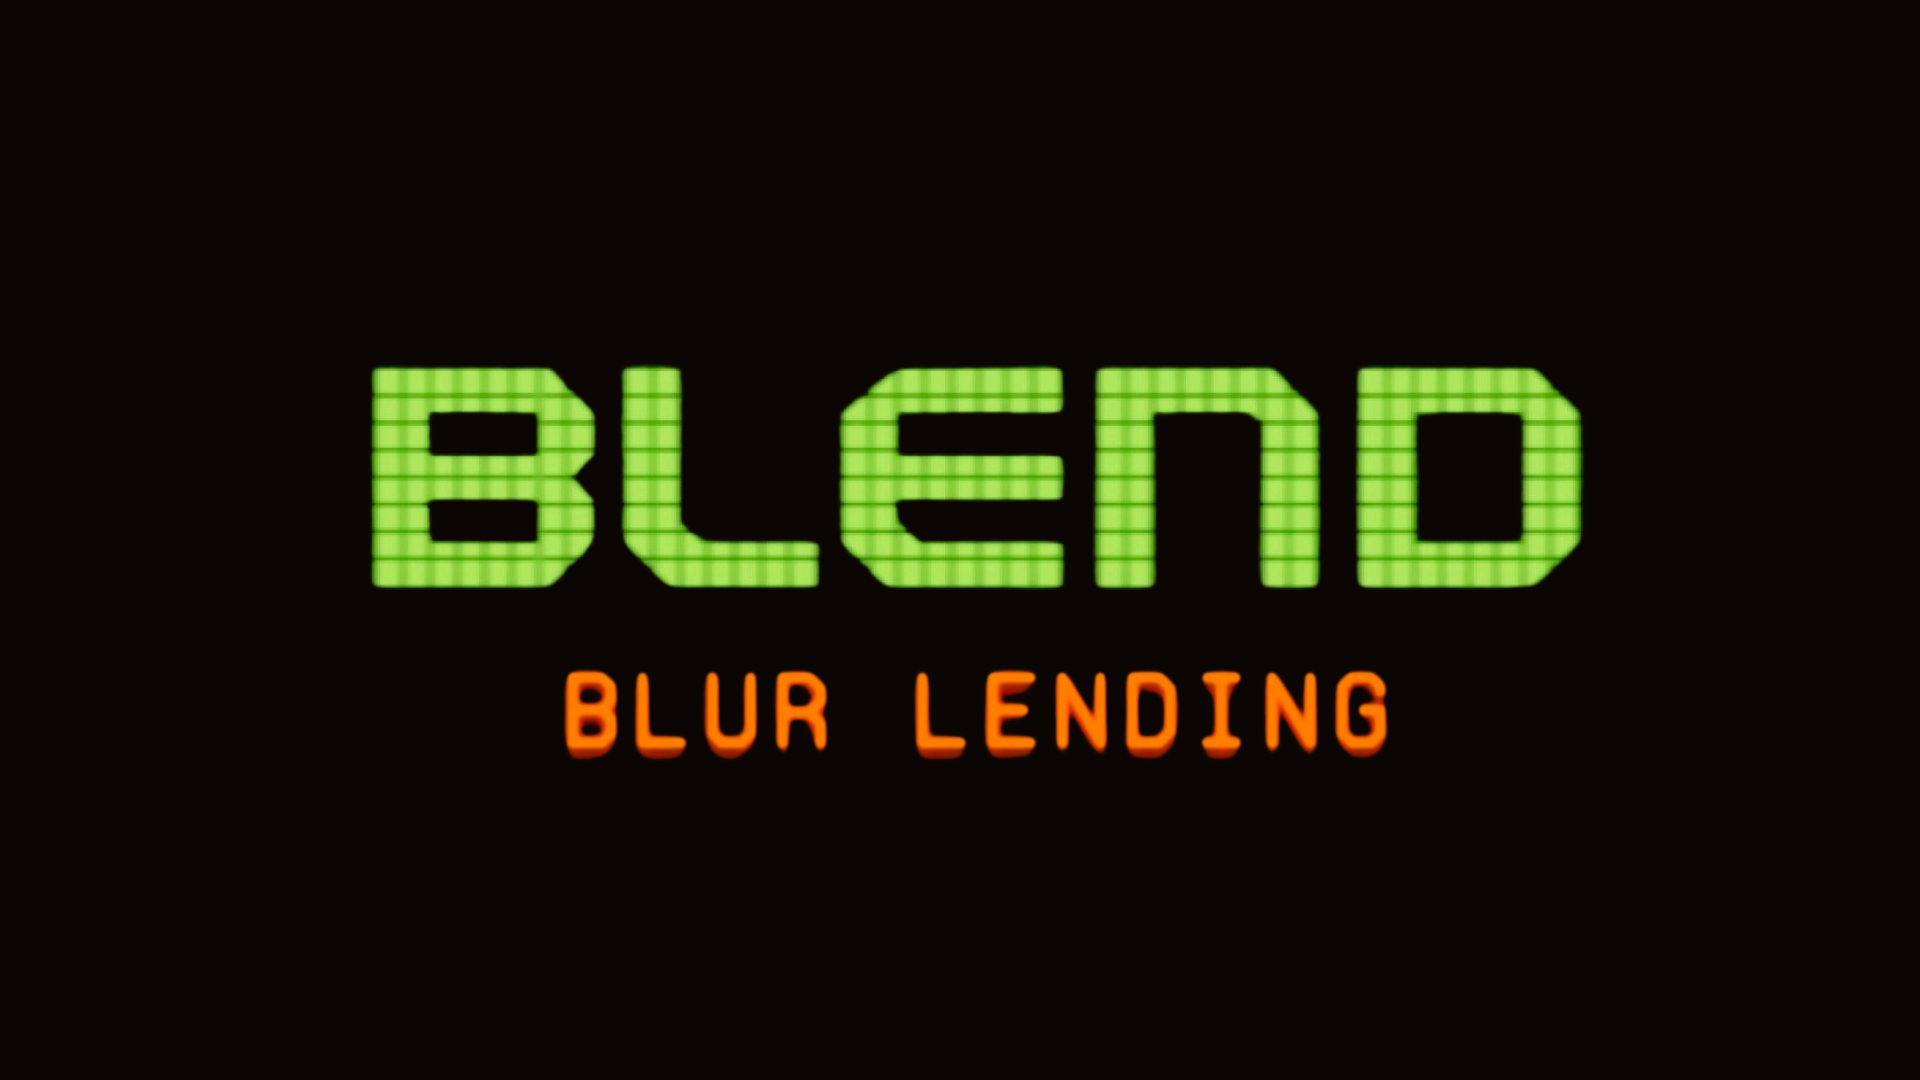 Blend secures the top spot in NFT lending with 82% market share